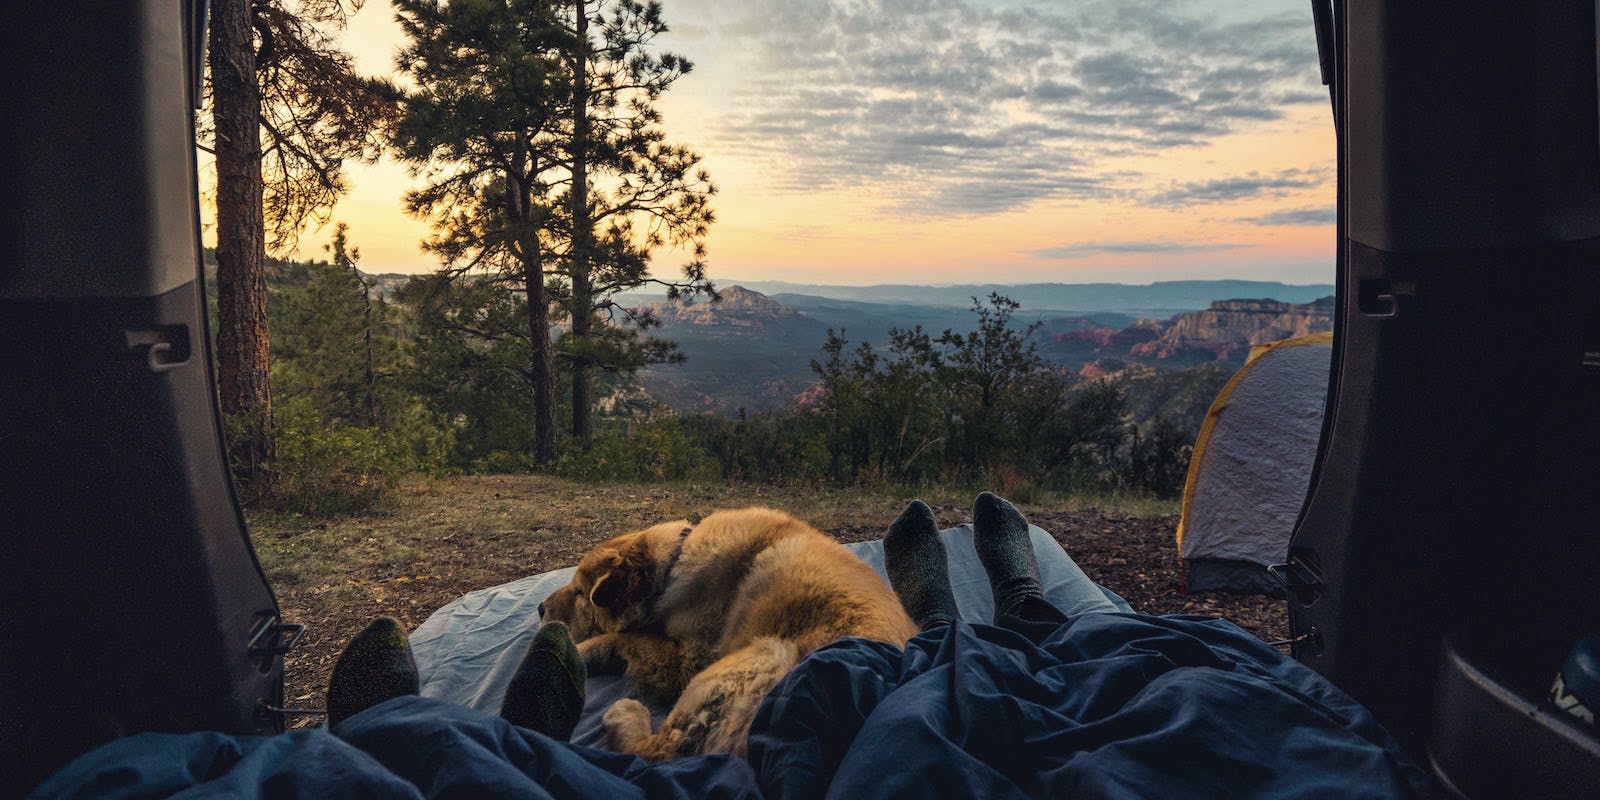 A photograph taken from inside a vehicle shows a broad mountain vista in the distance and a person's legs in a sleeping bag with a large dog sleeping alongside.